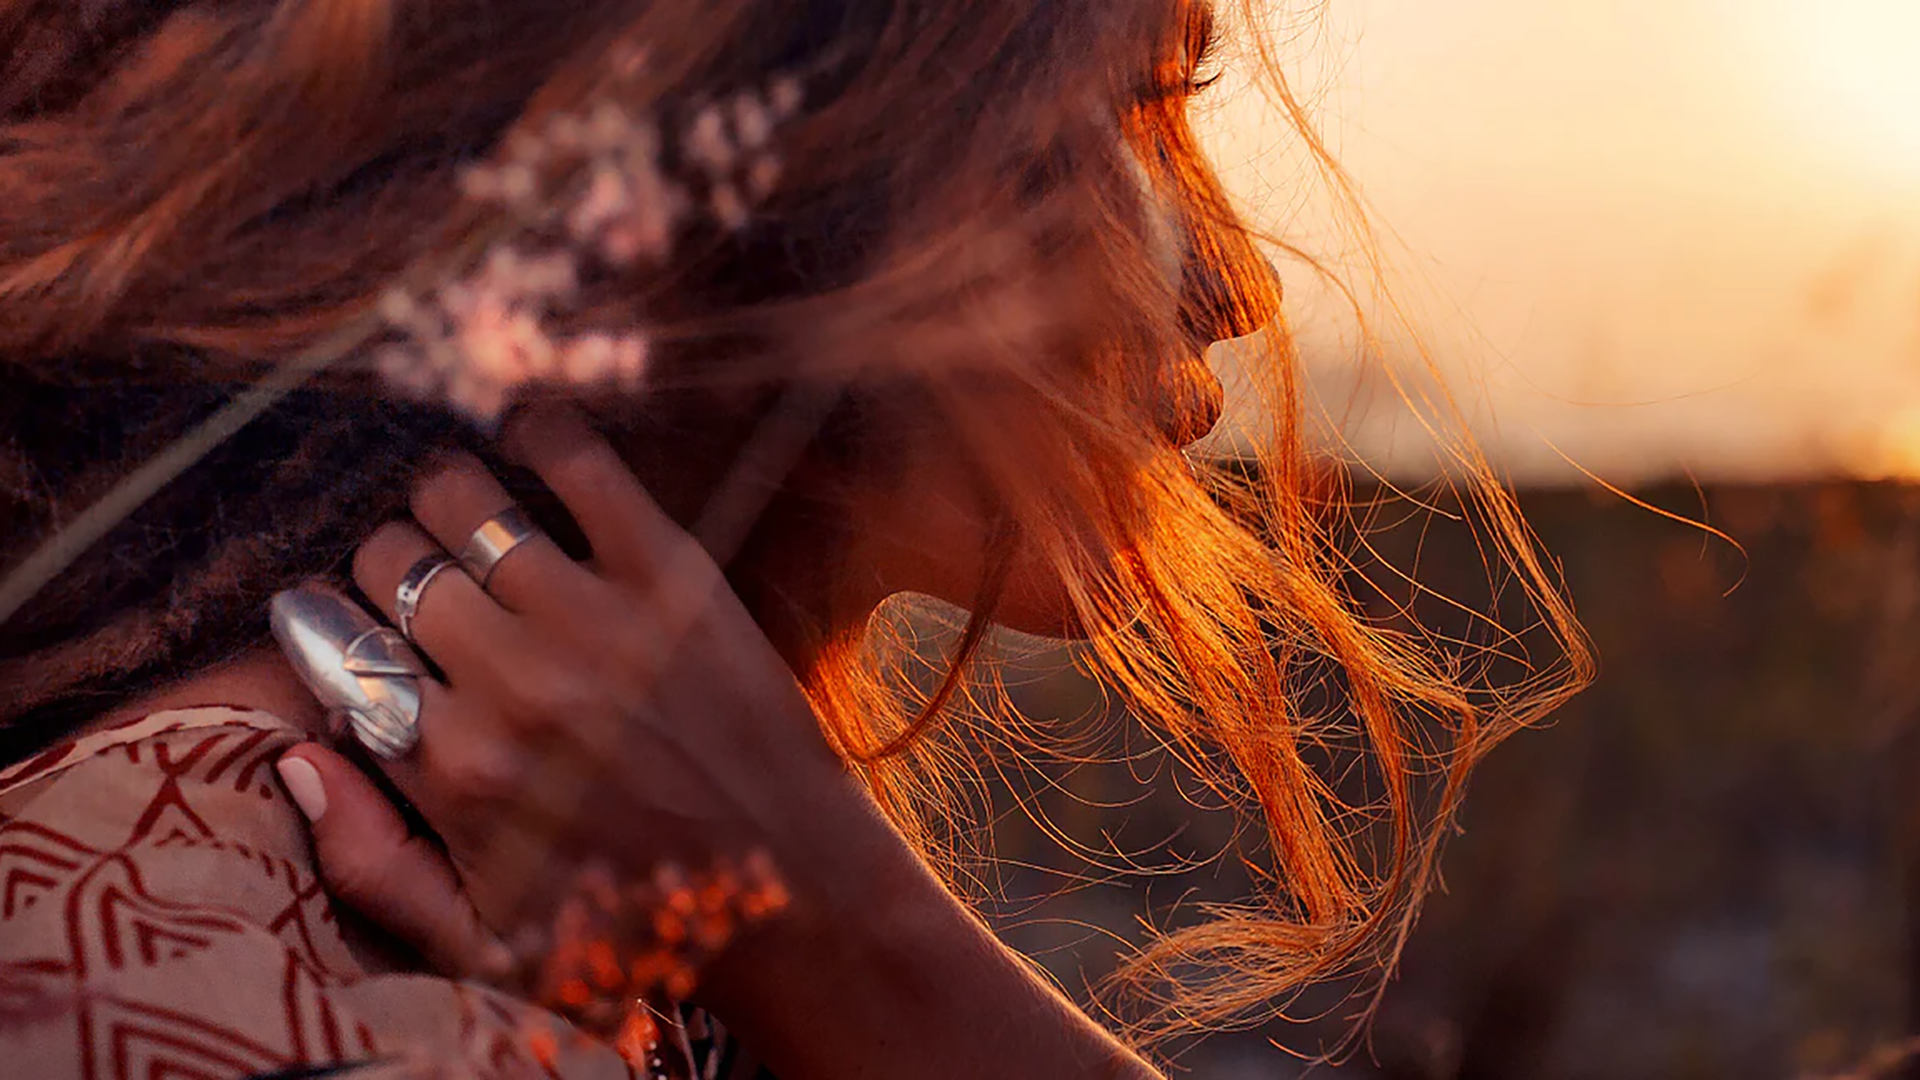 Joseph and Rose, a Bohemian Jewelry and Clothing Brand, has Launched its Website